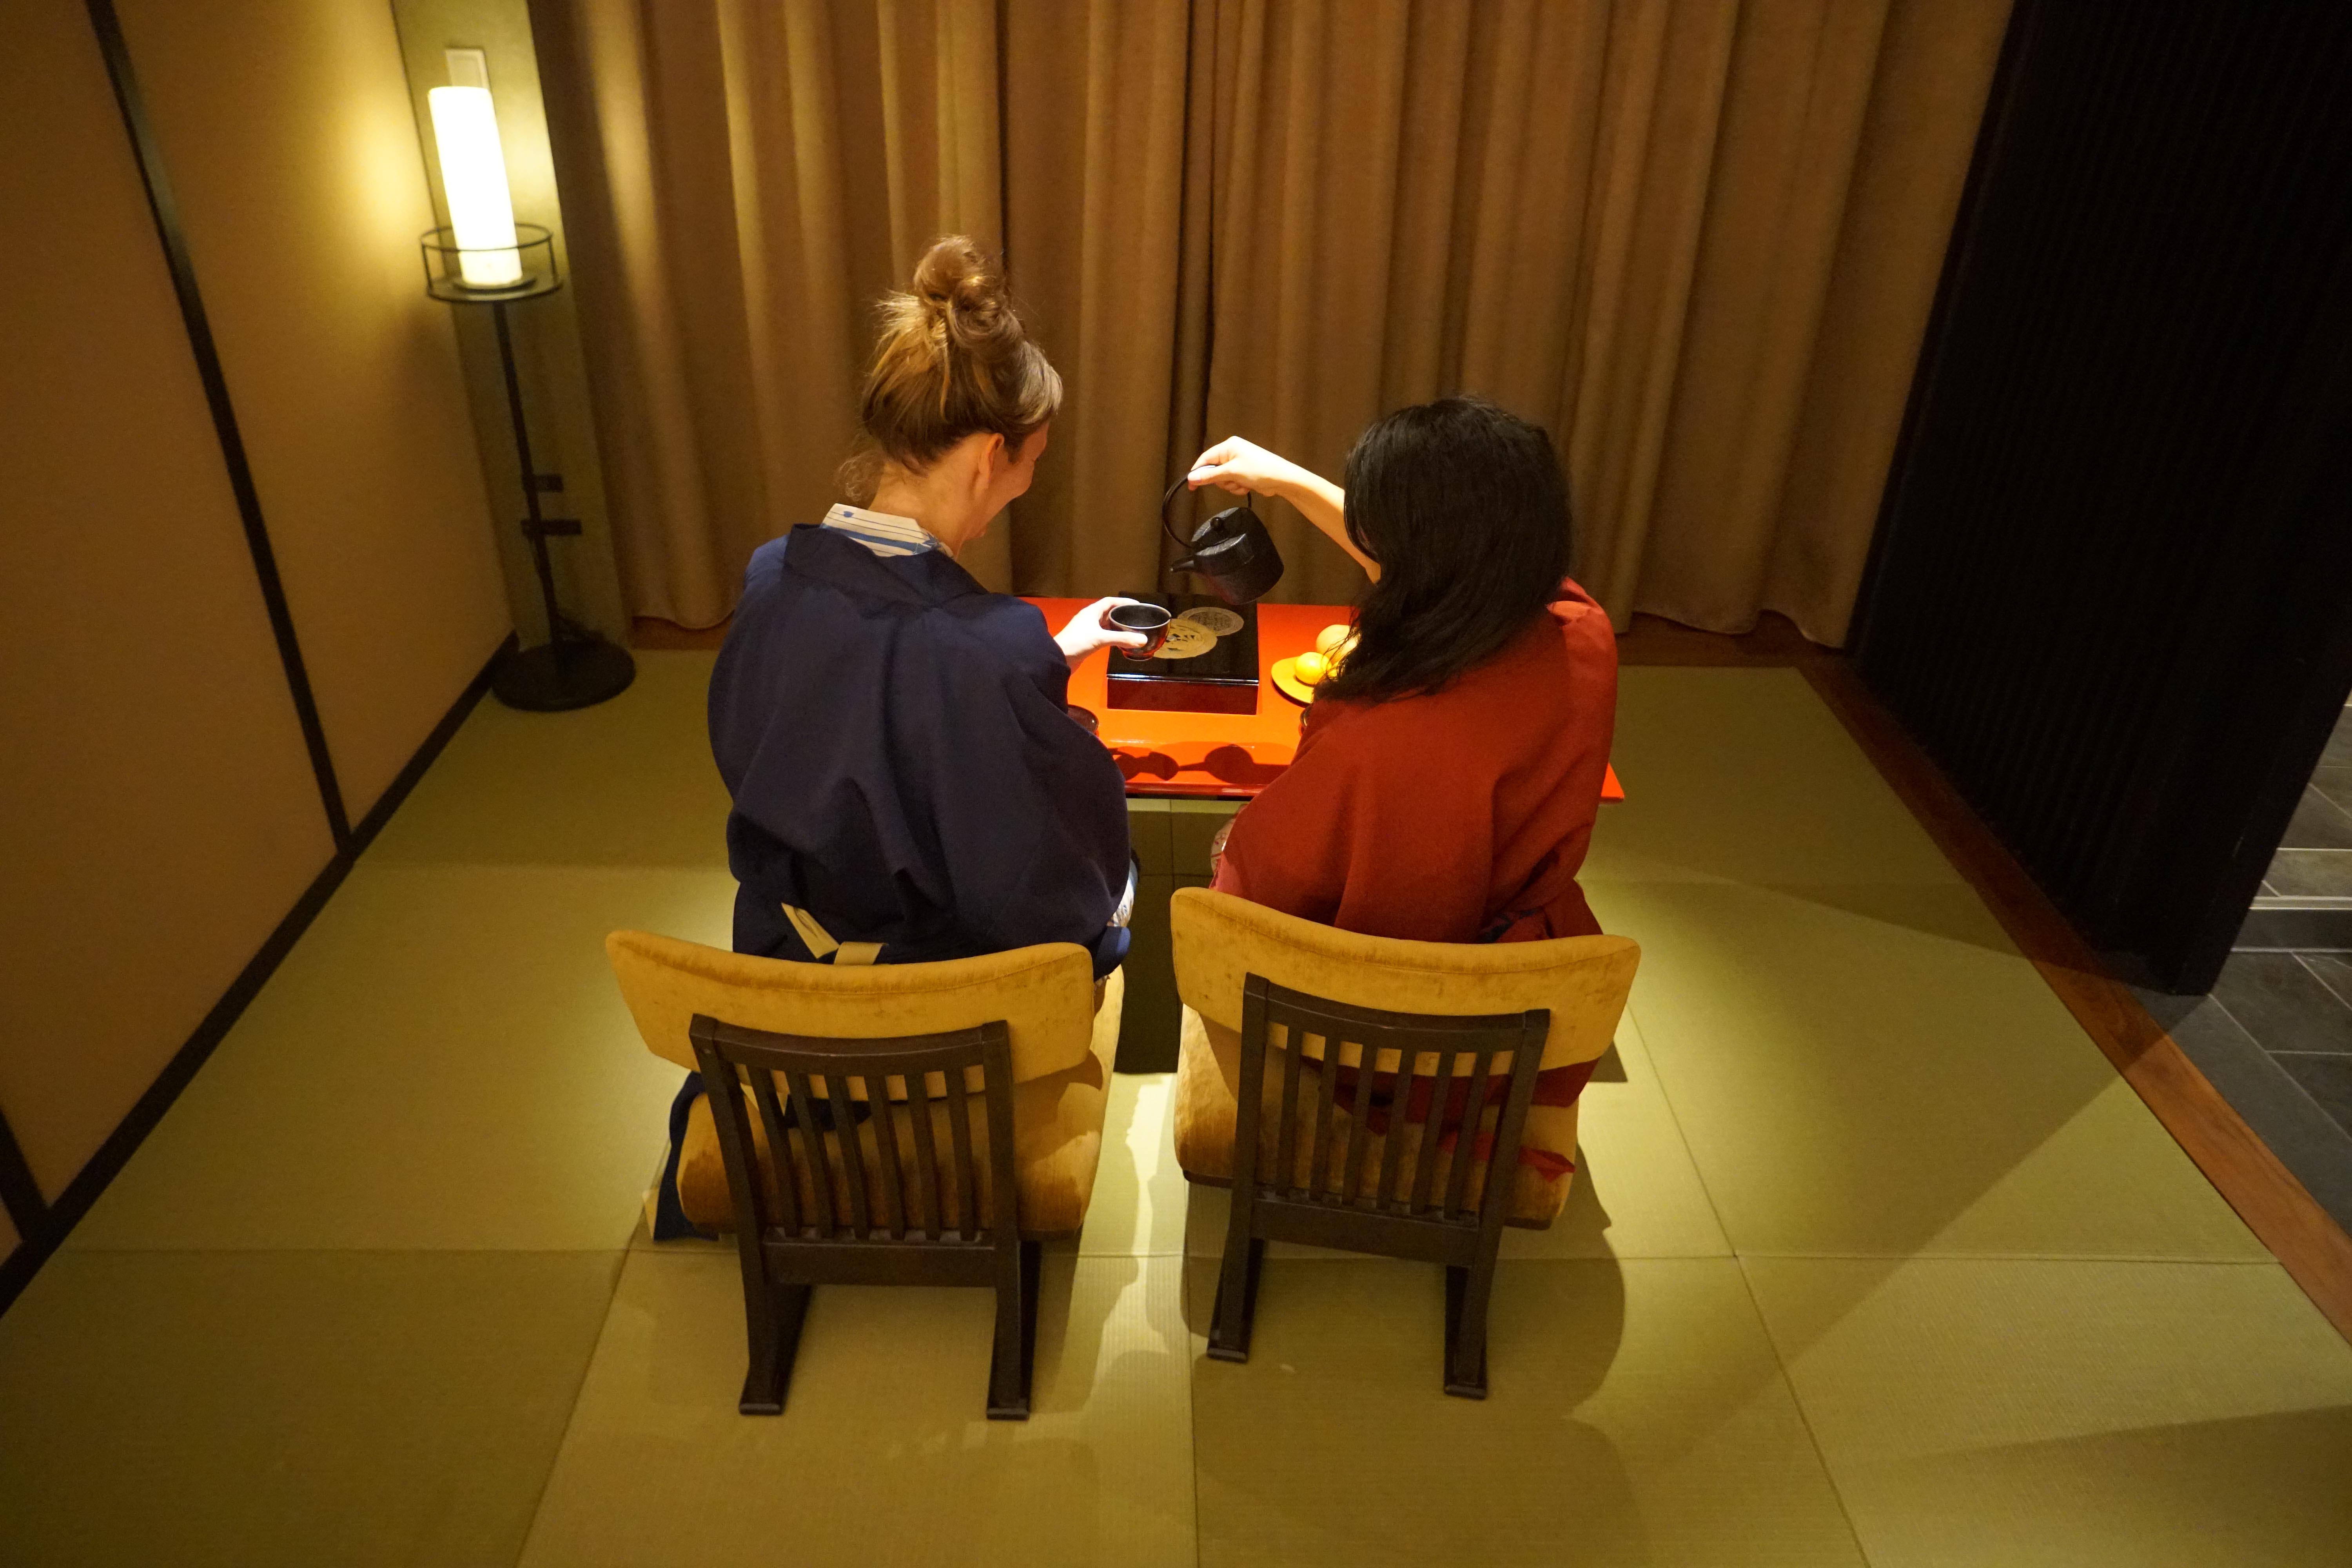 two girls having tea at the table on the matt in the room 